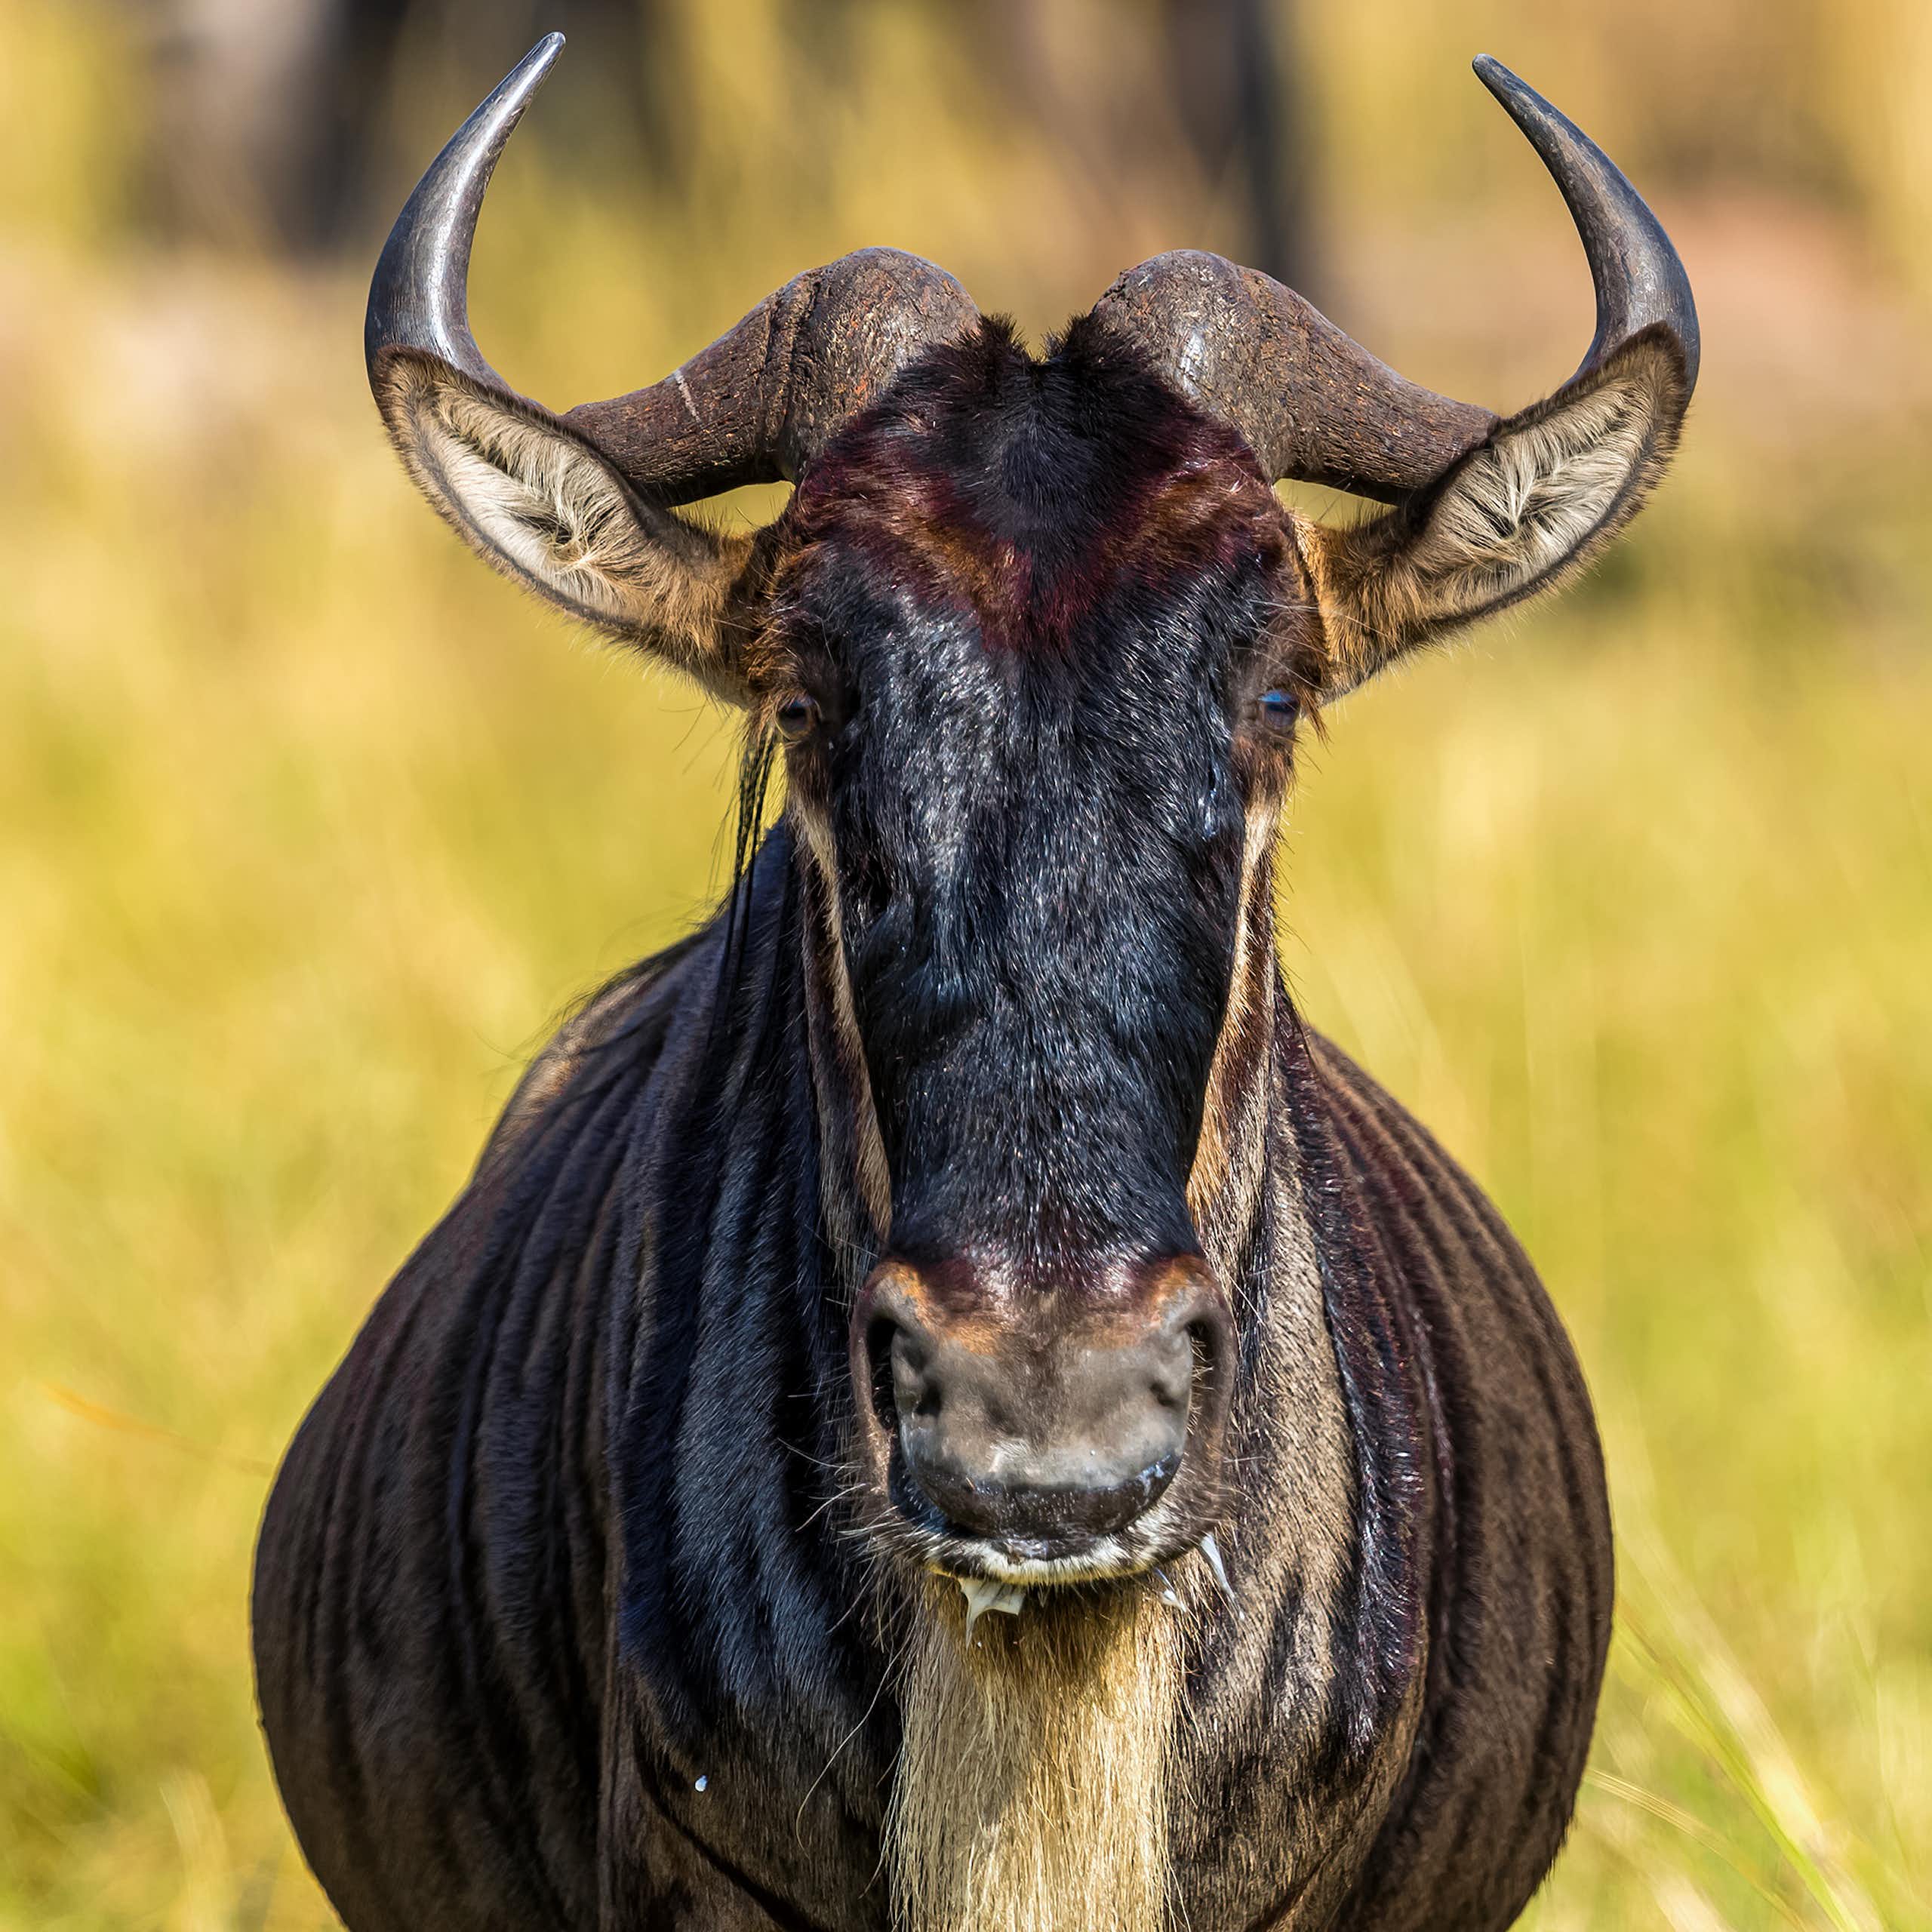 Front view of an animal with curved horns and a beard